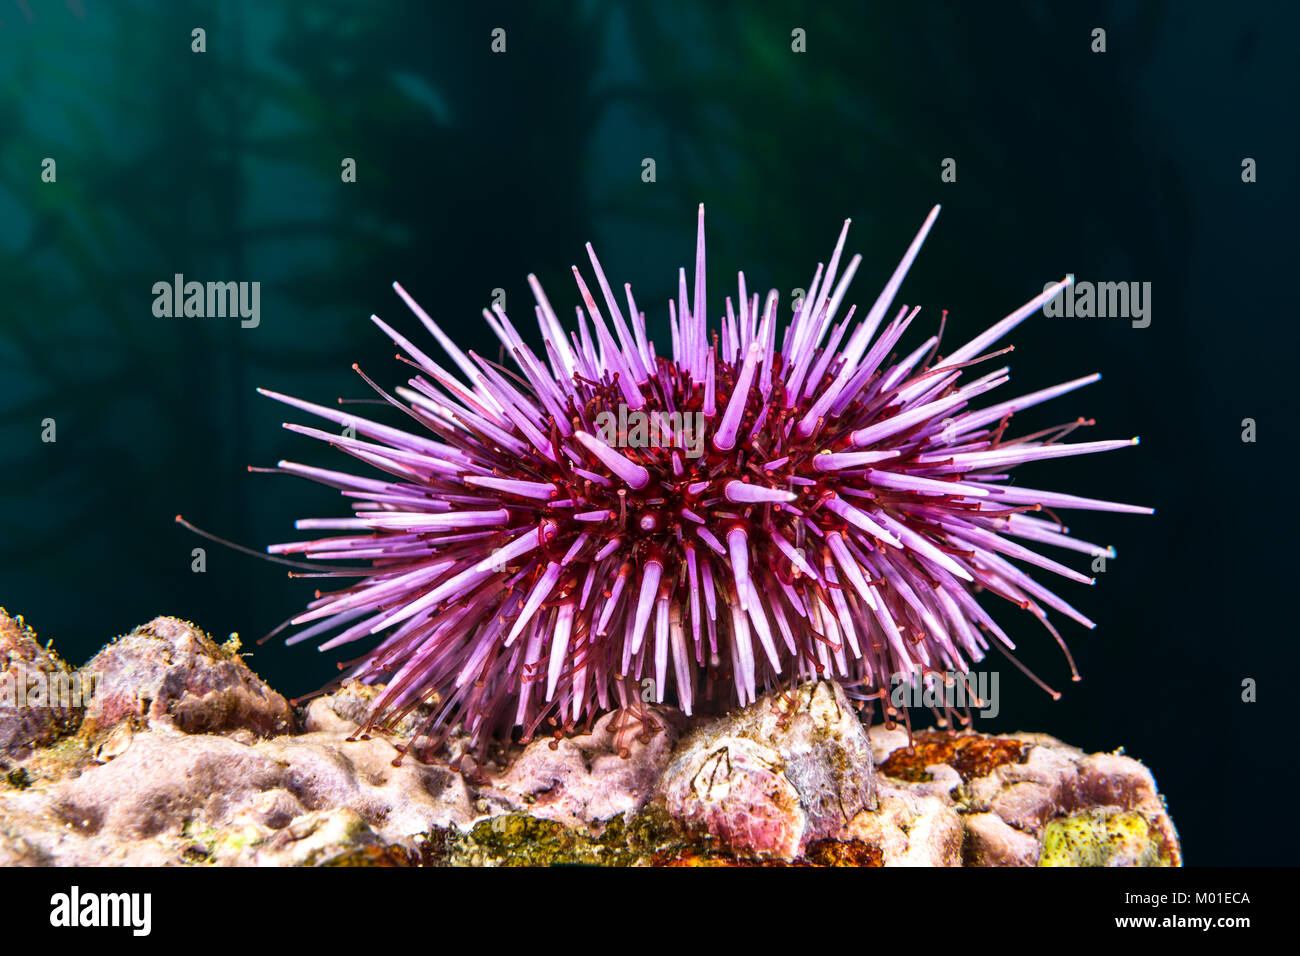 A purple sea urchin rests atop a reef hoping to find its favorite food, kelp. Stock Photo